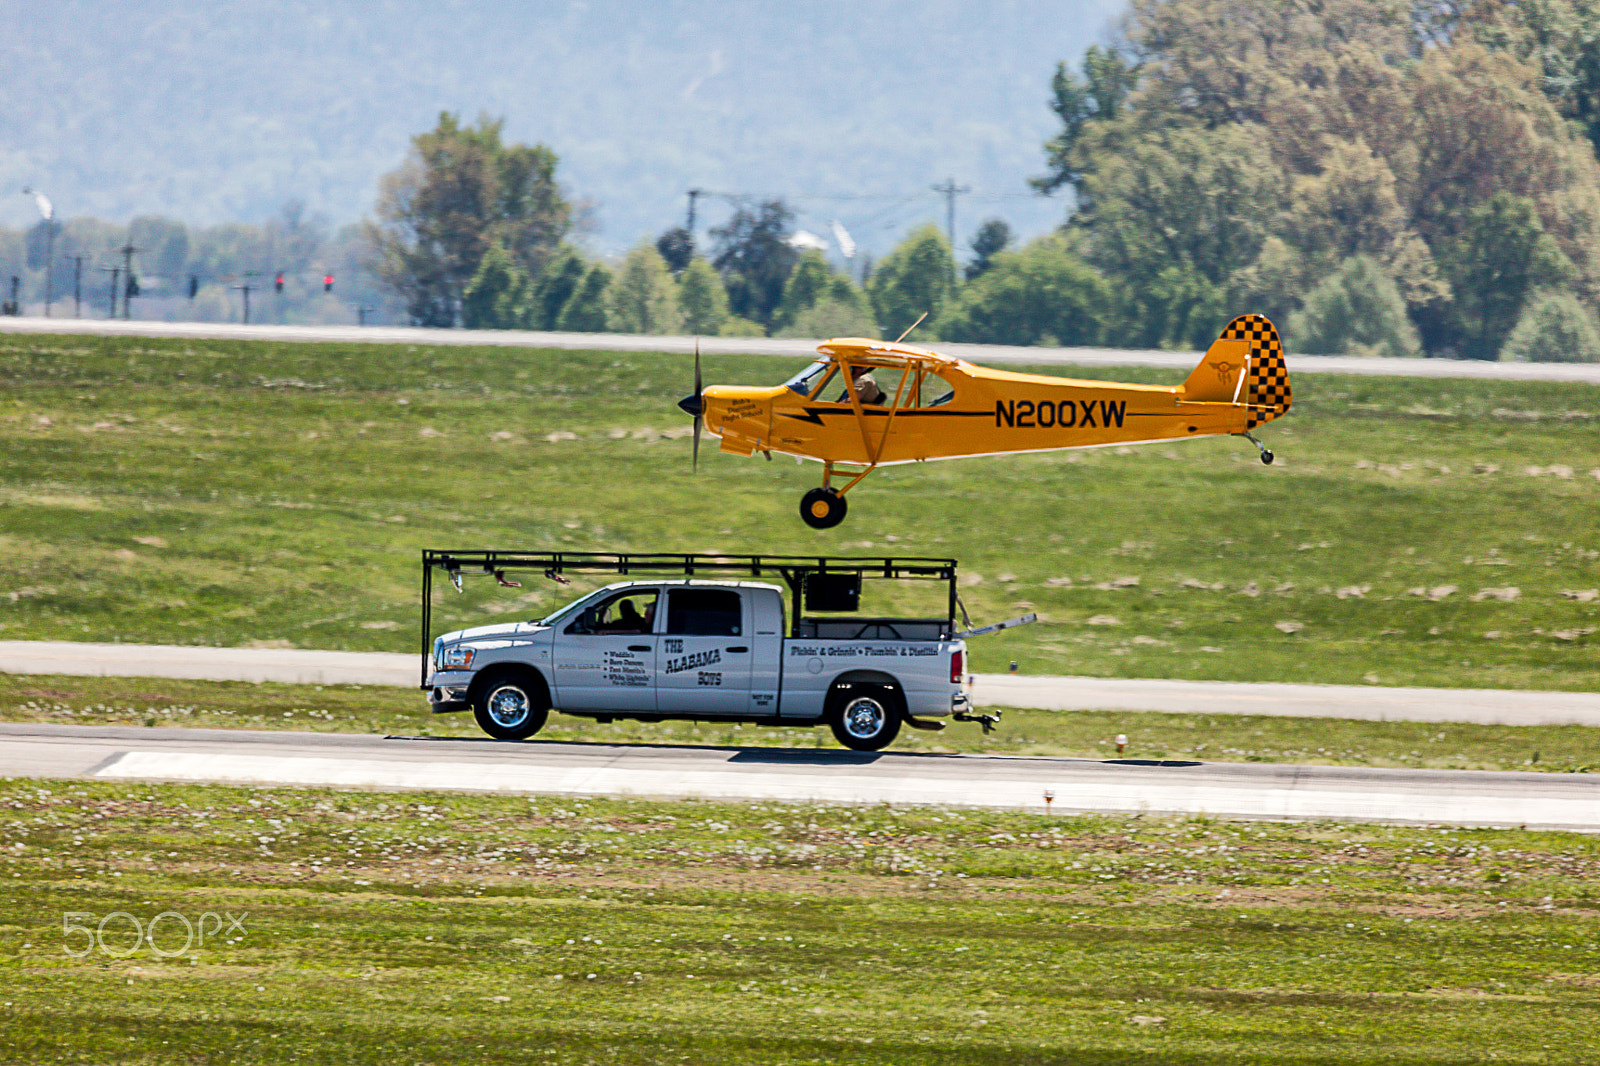 Canon EOS 5DS + Sigma 150-600mm F5-6.3 DG OS HSM | C sample photo. Greg koontz airshows landing on pickup photography